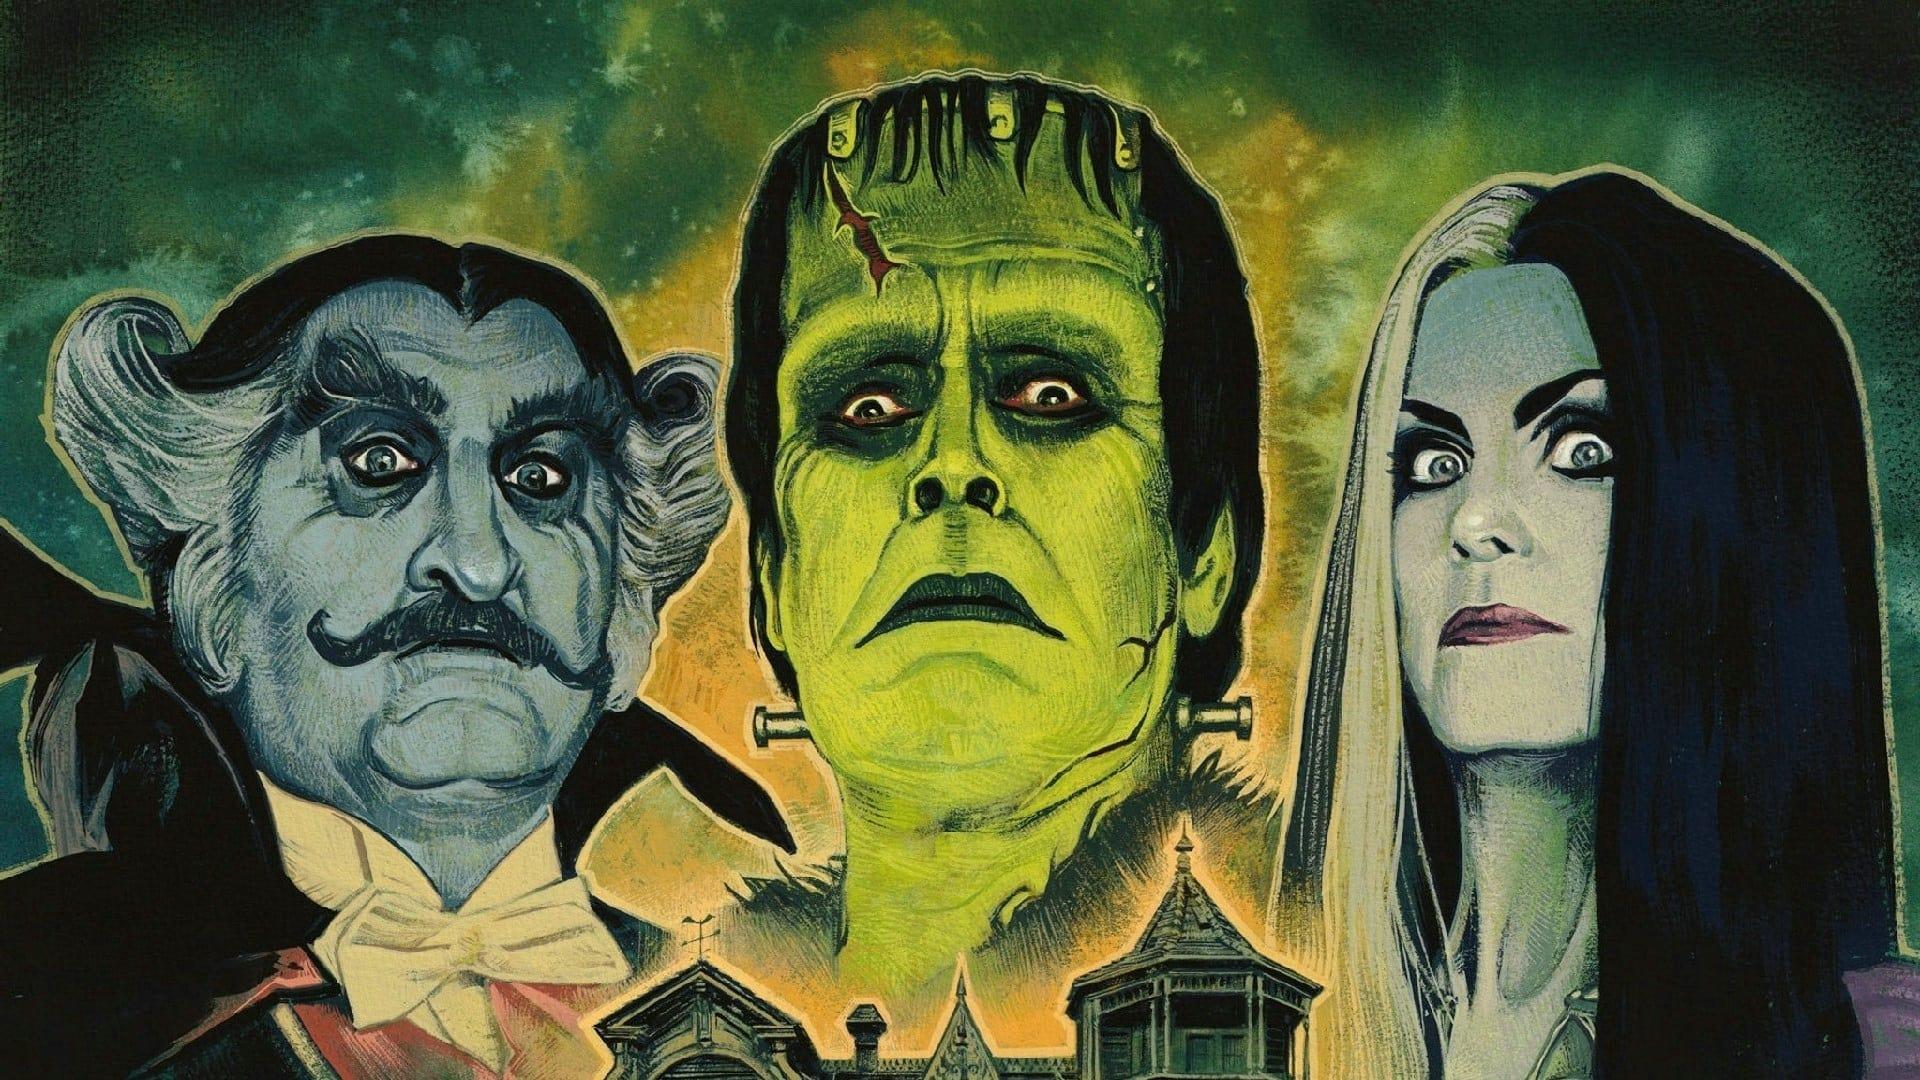 The Munsters backdrop